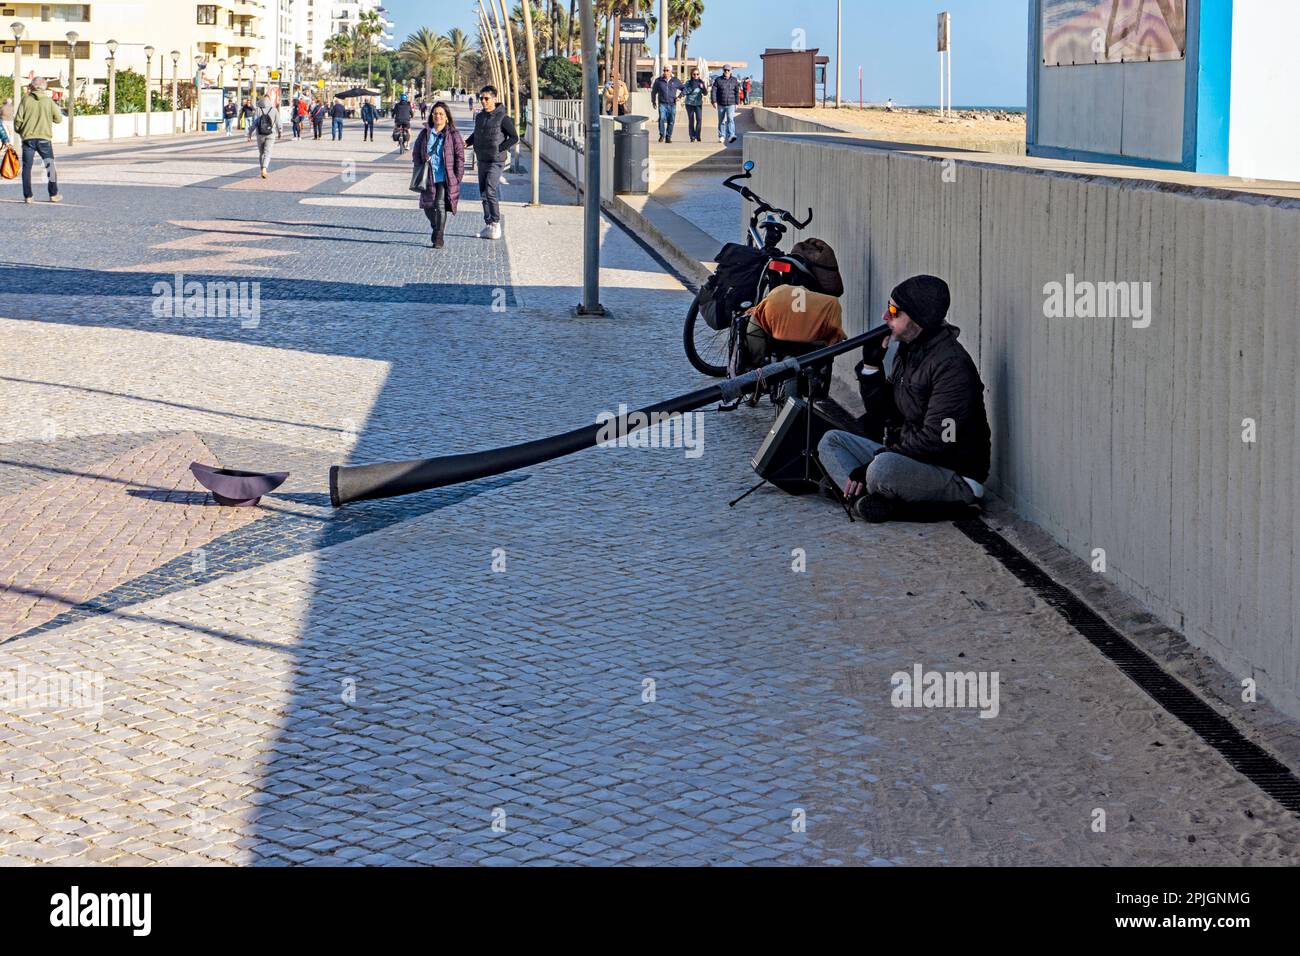 A street artist playing the didgeridoo on the promenade in Quarteira, Portugal. Stock Photo